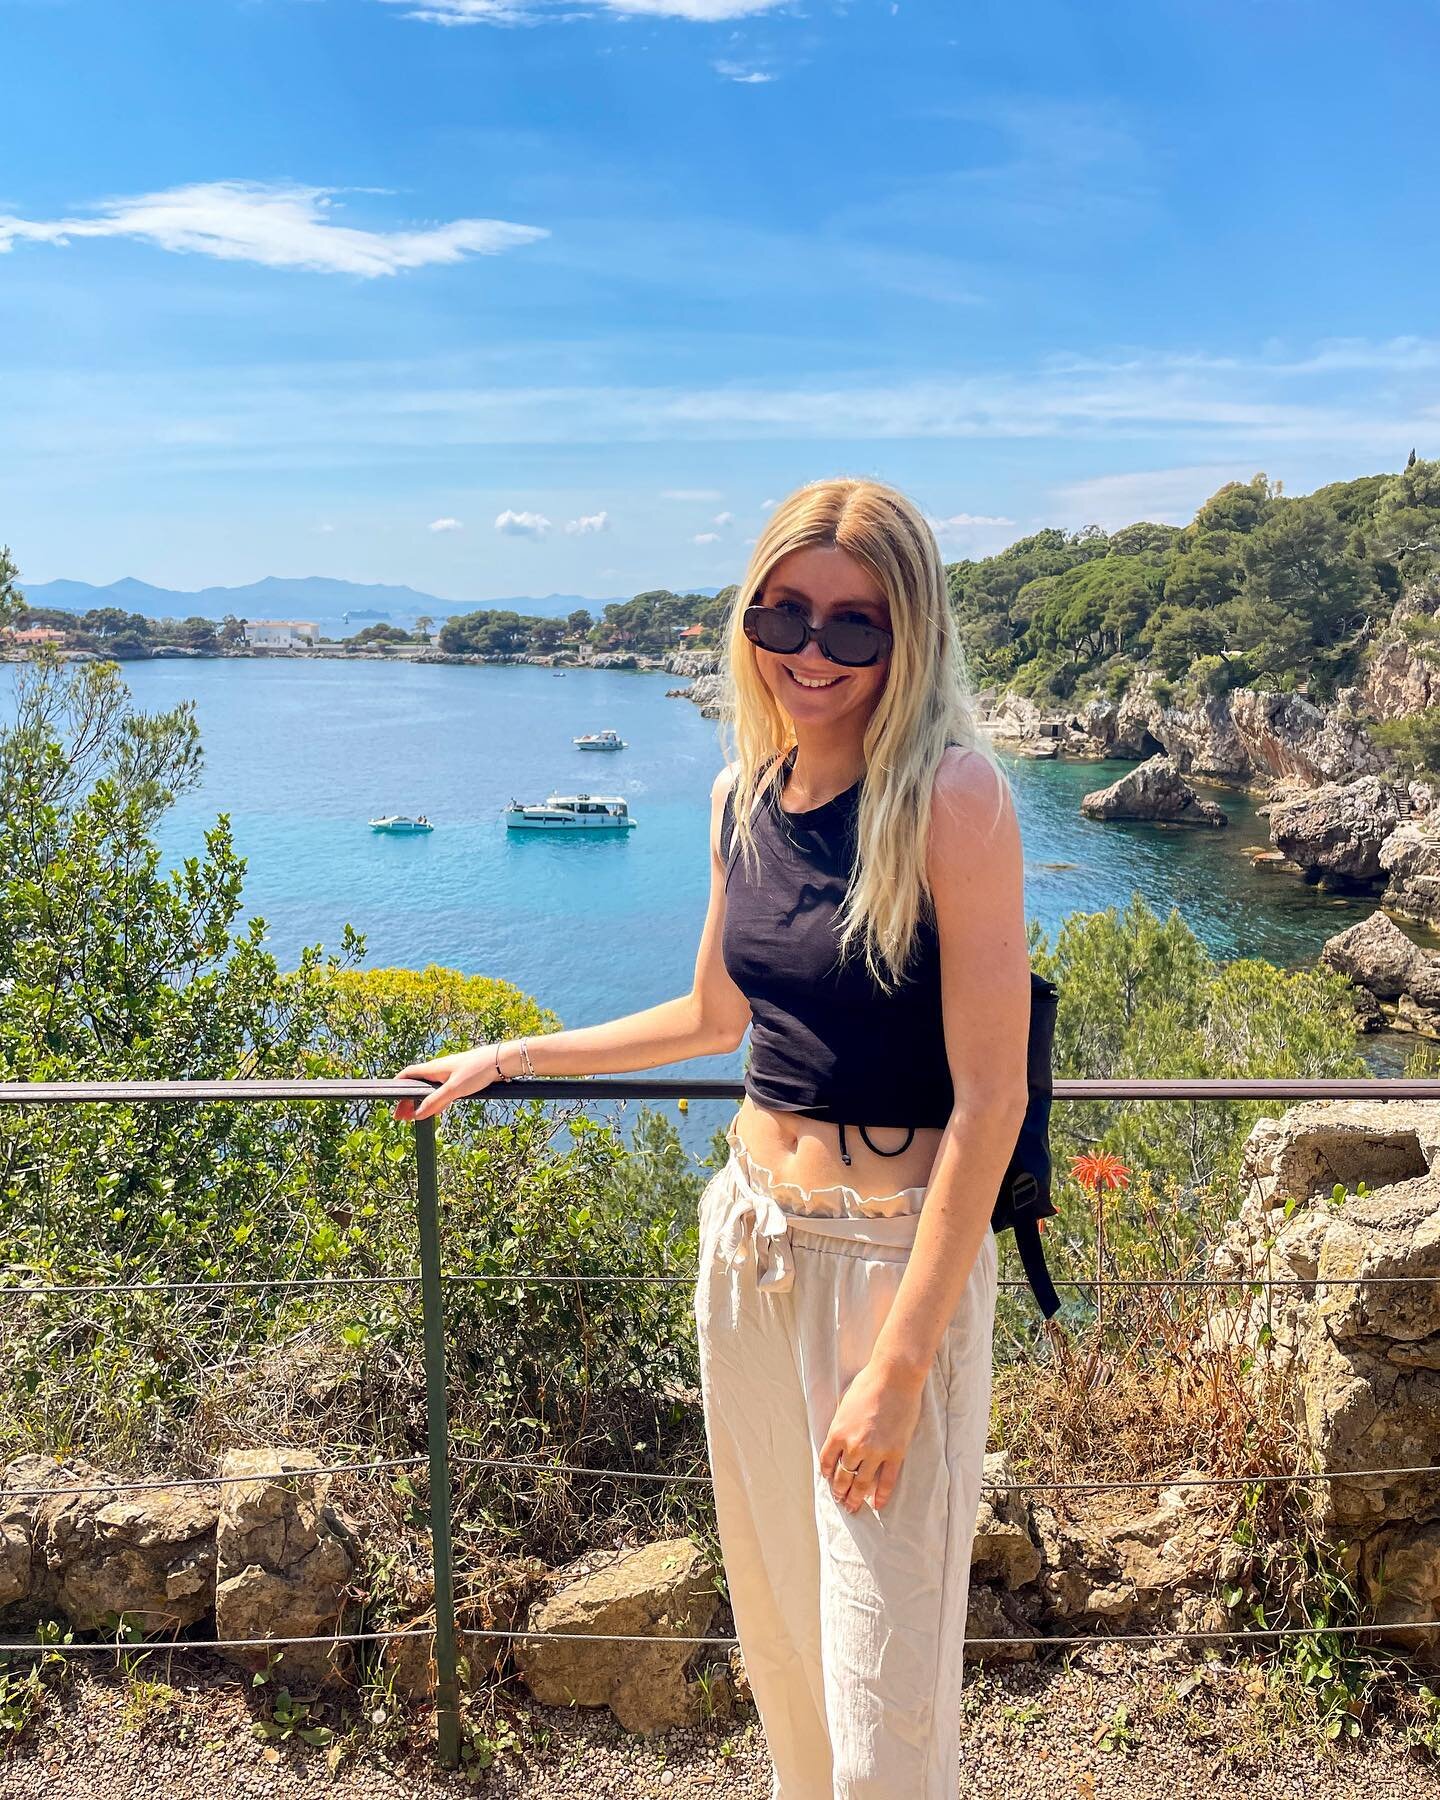 📍Antibes, France 🇫🇷 A beautiful place to spend a day!

💡Here are some ideas:

🦞Stop for a delicious + wallet-friendly meal at Chez Mo

🏊🏻&zwj;♀️ Head to Billionaire&rsquo;s Bay for some wild swimming and sun-lounging

🛥️👀 Wander around the A